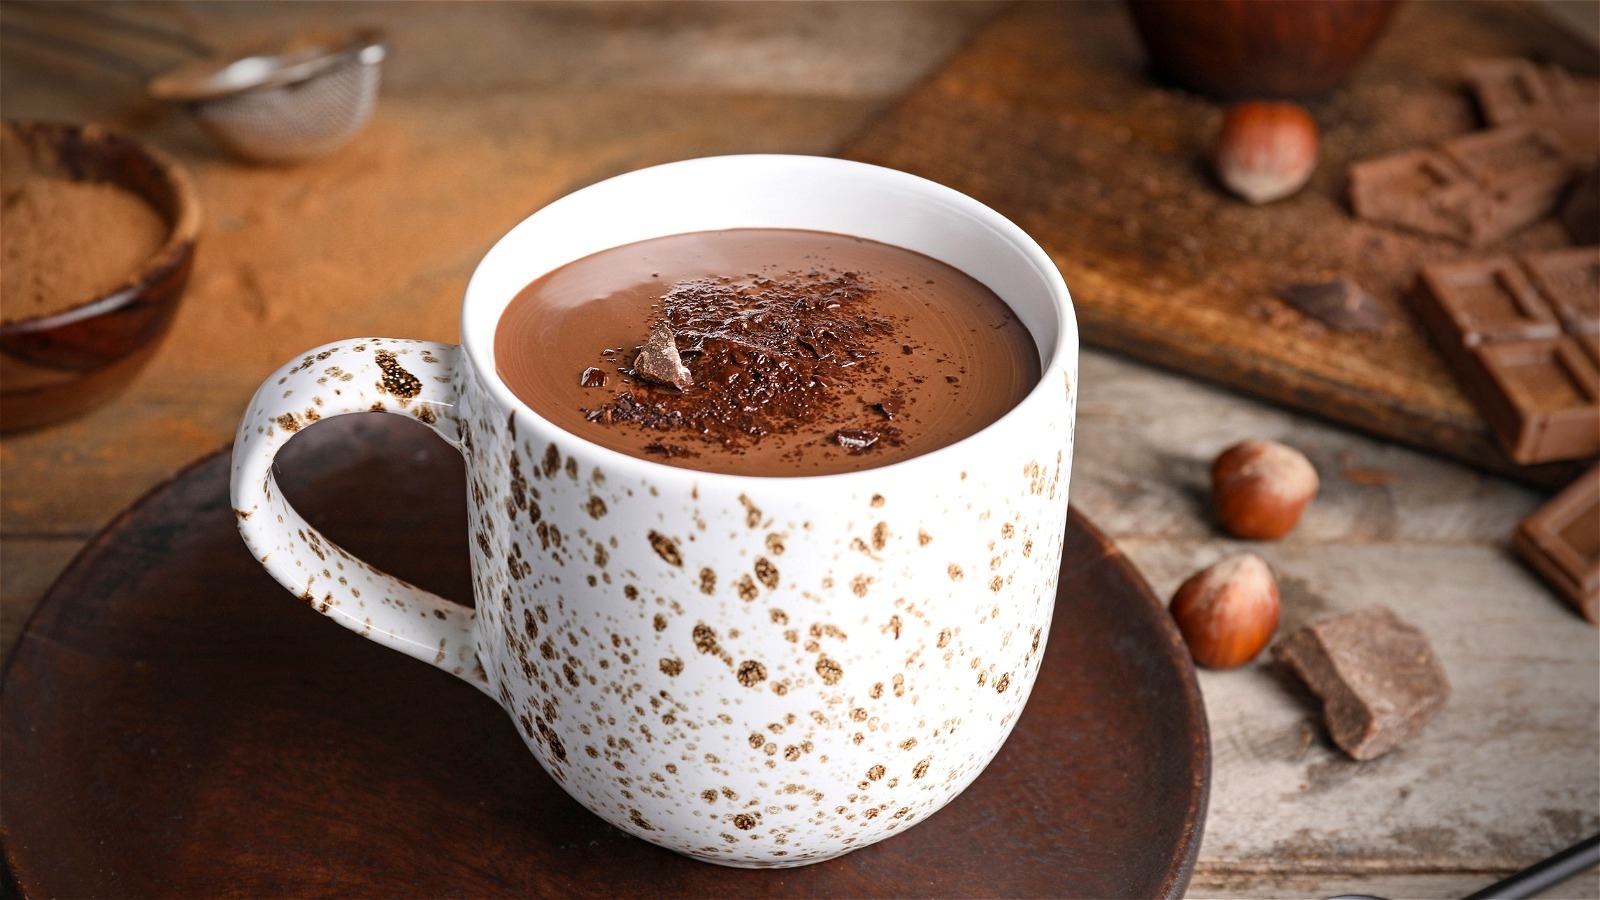 https://www.thedailymeal.com/img/gallery/keep-hot-chocolate-warm-for-hours-with-your-slow-cooker/l-intro-1670587539.jpg